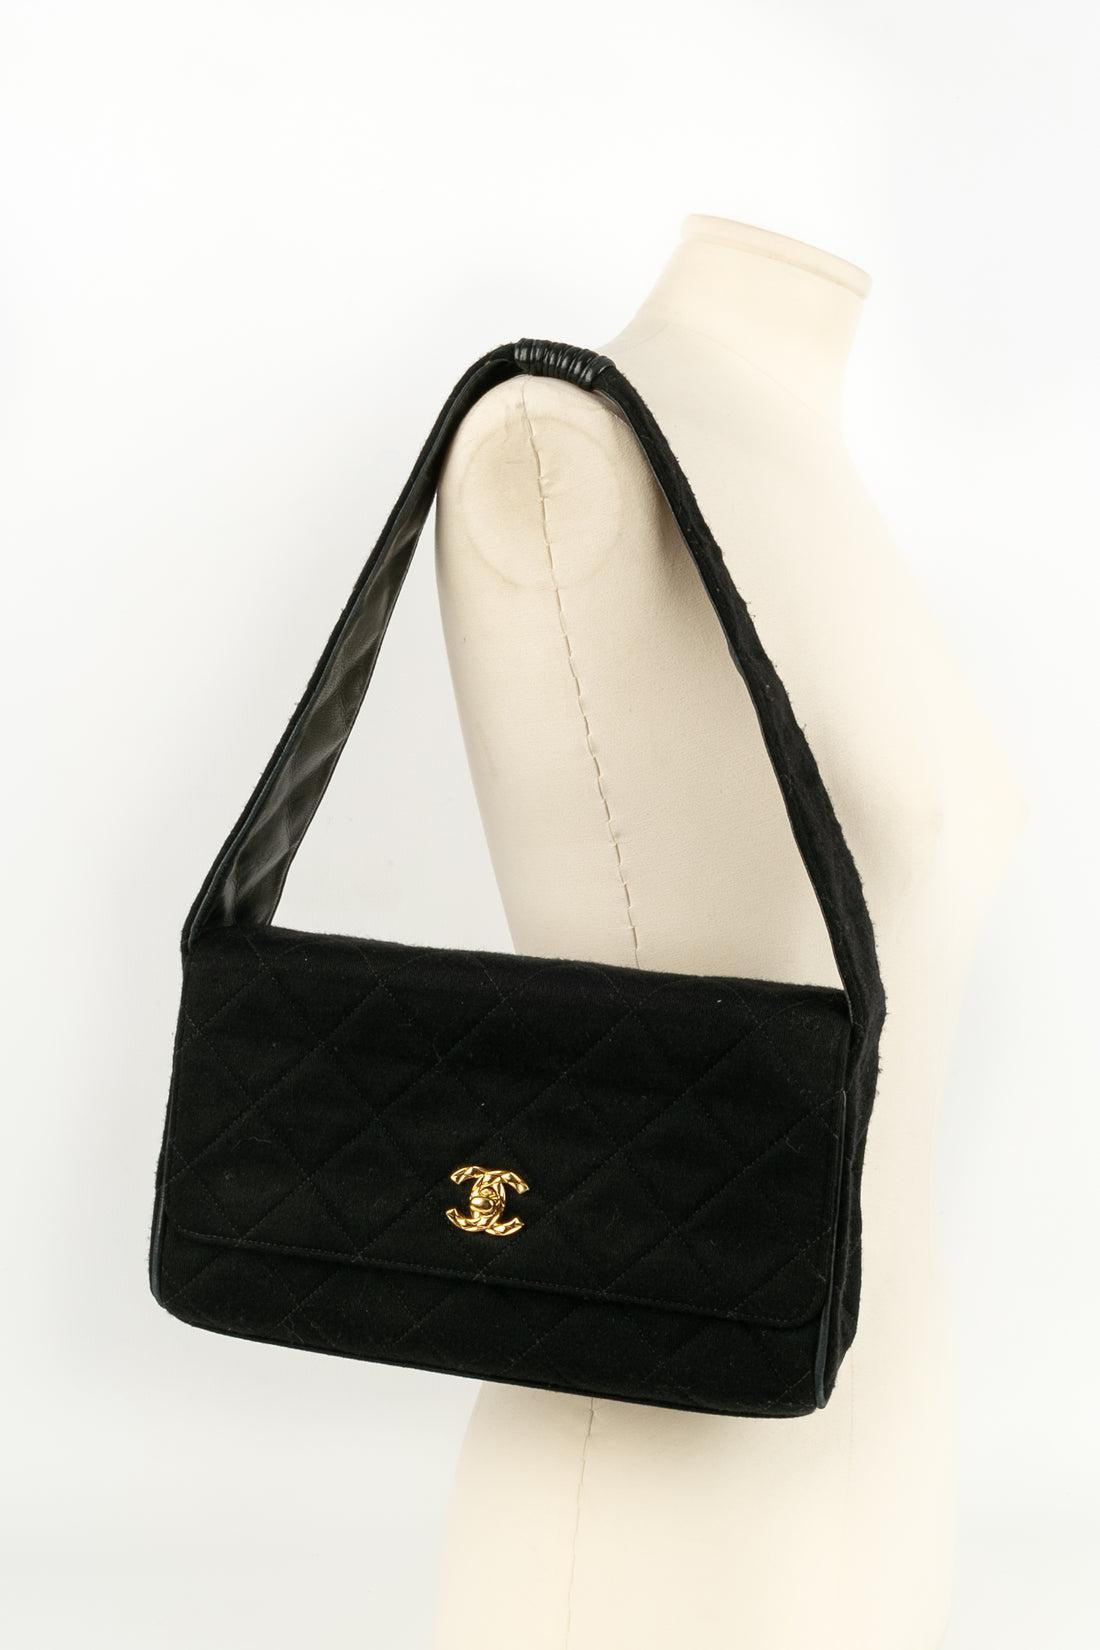 Chanel - (Made in France) Bag in jersey and black leather. Serial number missing because it is a vintage model. 
Presence of the S of Solde on the leather inside. 
To note, the leather corners have traces of wear.

Additional information: